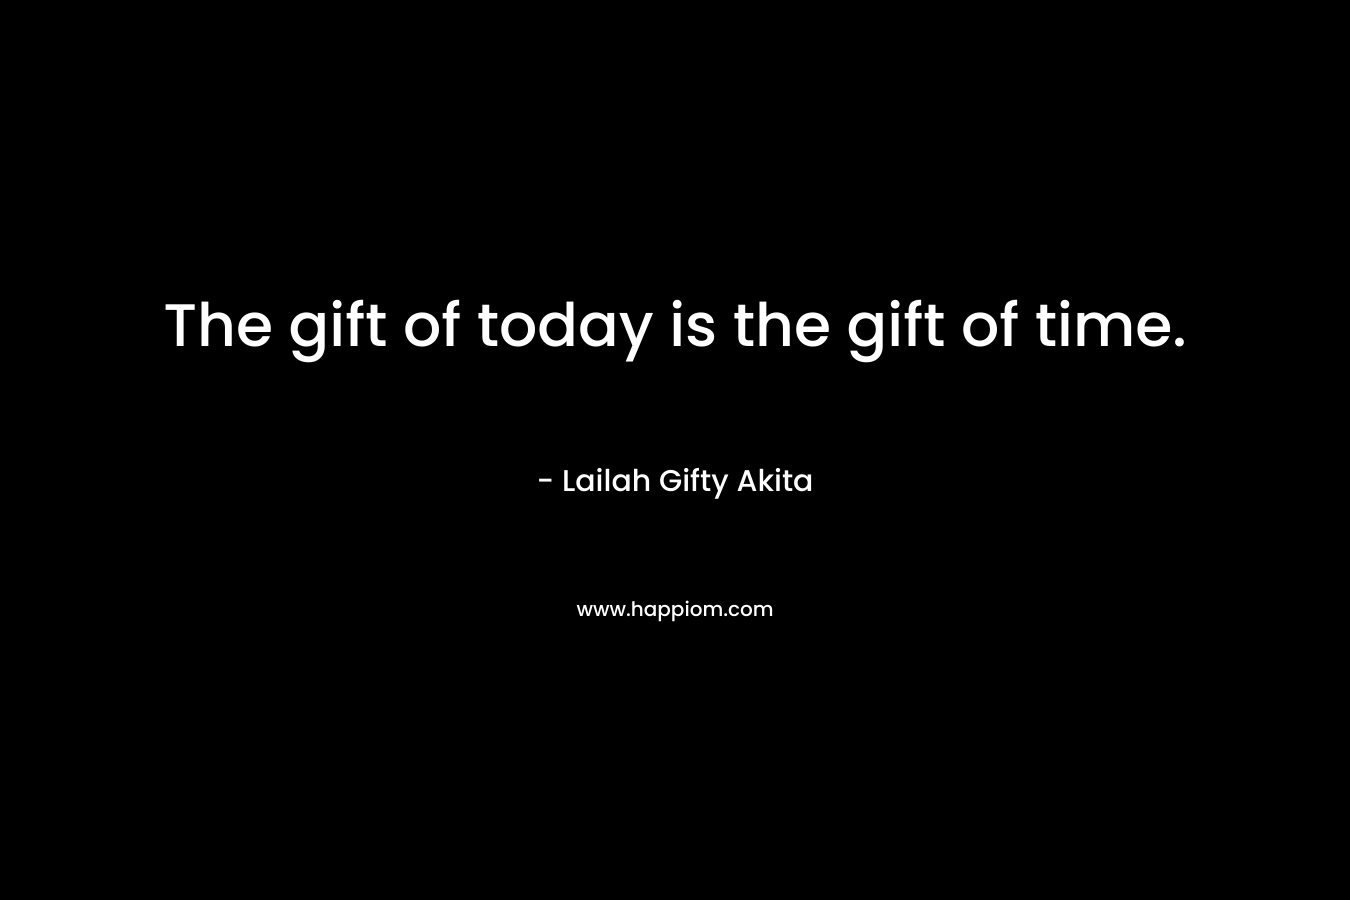 The gift of today is the gift of time.